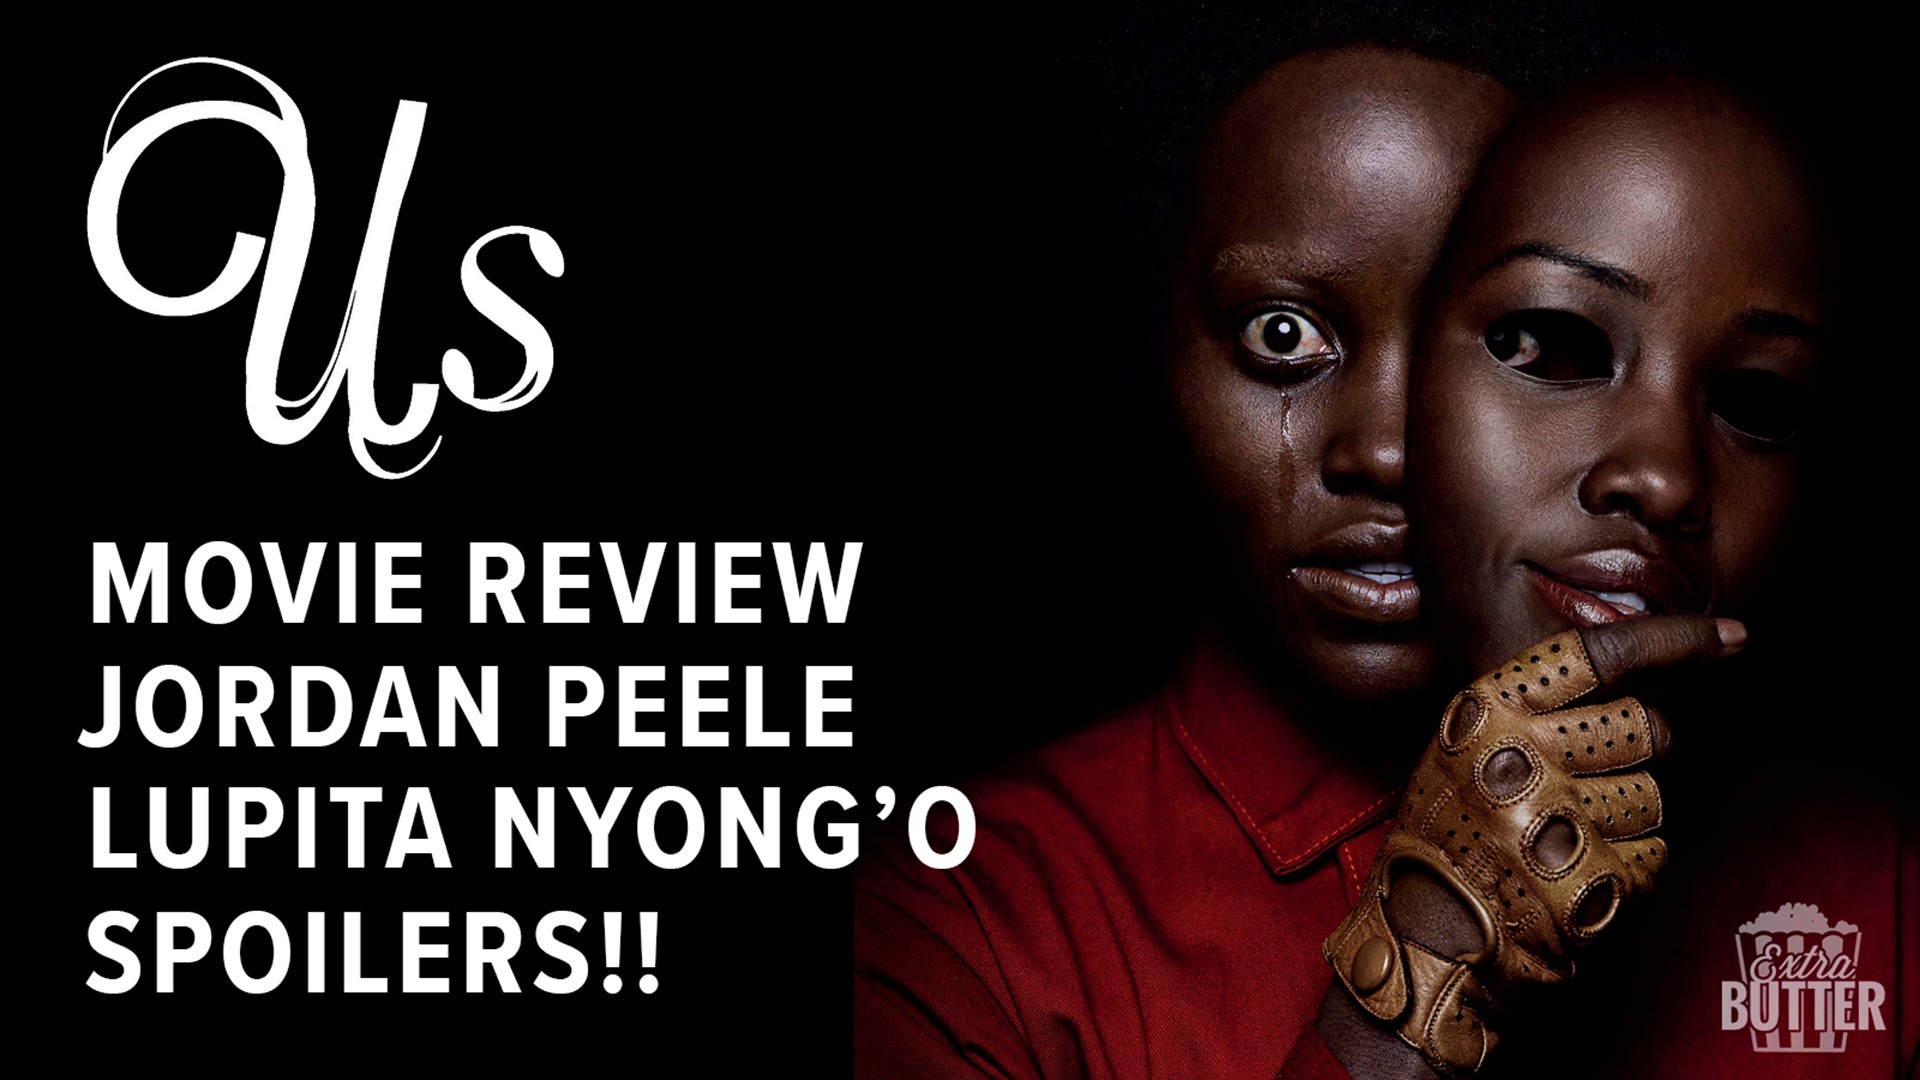 Extra Butter reviews 'Us,' the new movie from director Jordan Peele. But be warned, this review includes easter eggs and spoilers, including that twist ending. Hear from Jordan Peele and Lupita Nyong'o. Interviews provided by Universal Pictures.